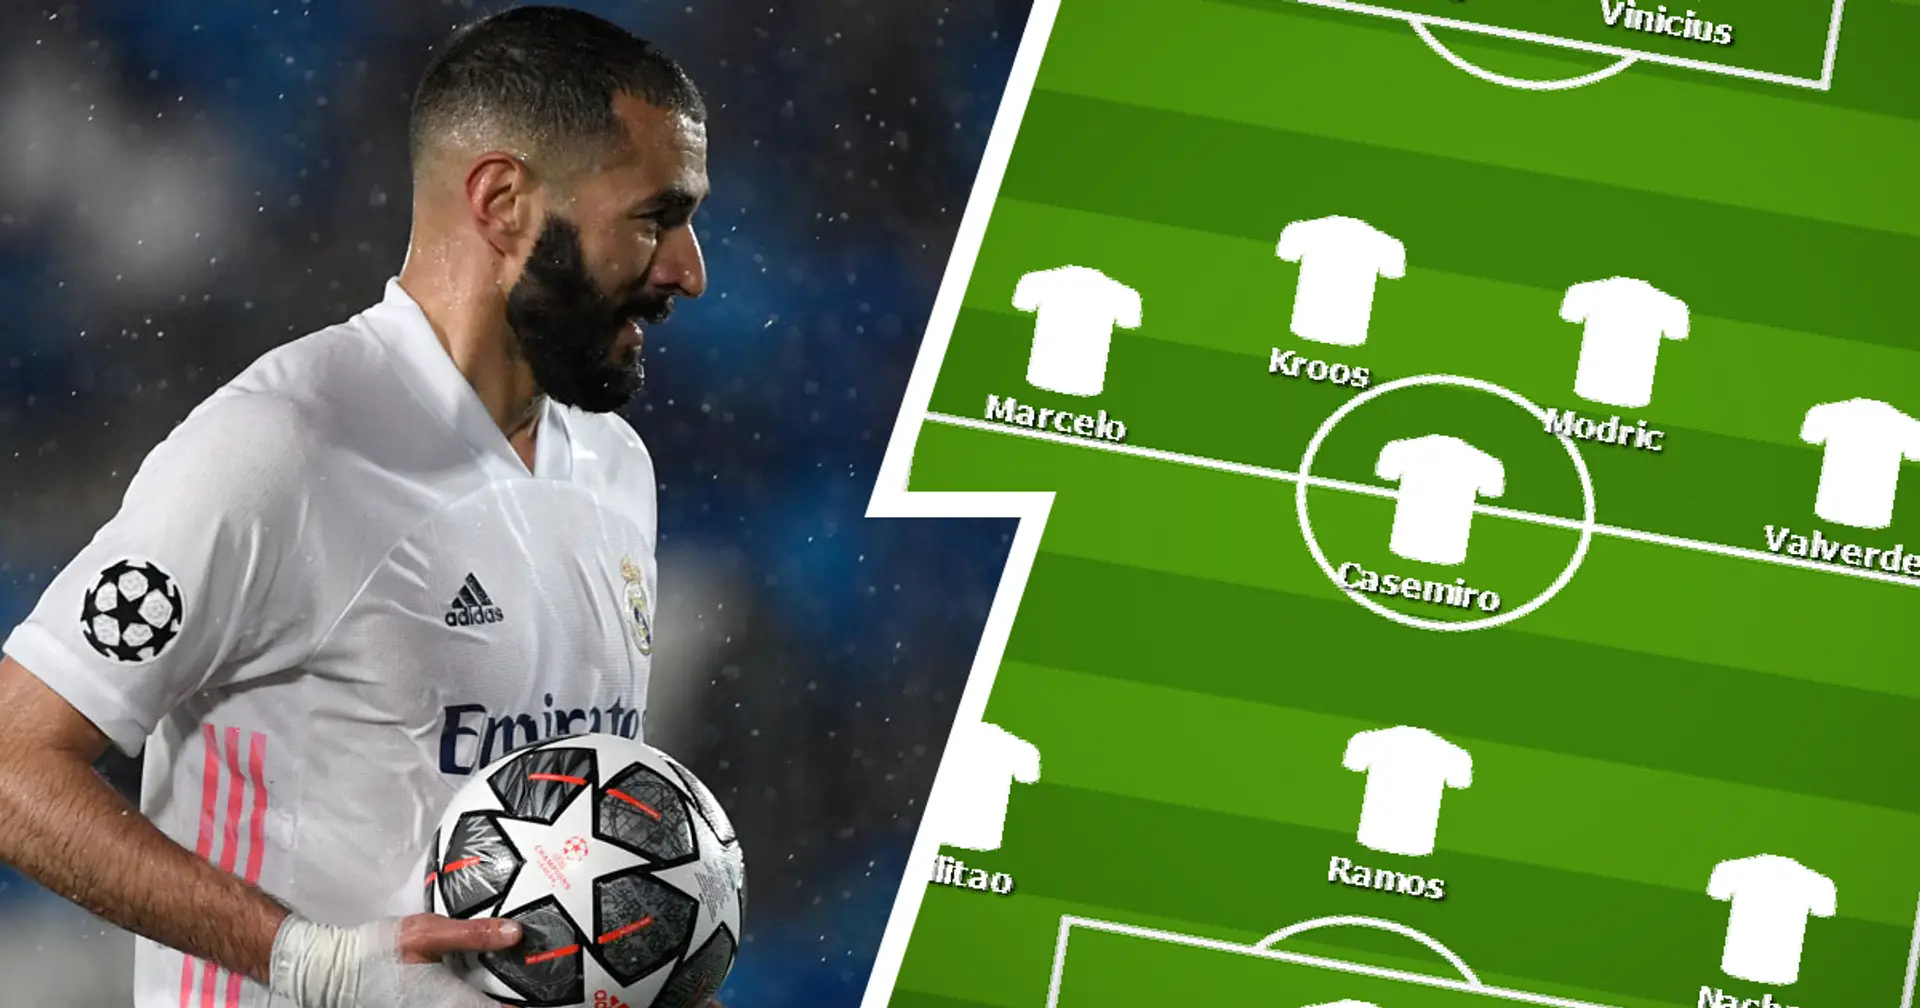 Real Madrid's likely XI vs Chelsea's likely XI: Where will the game be won and lost?